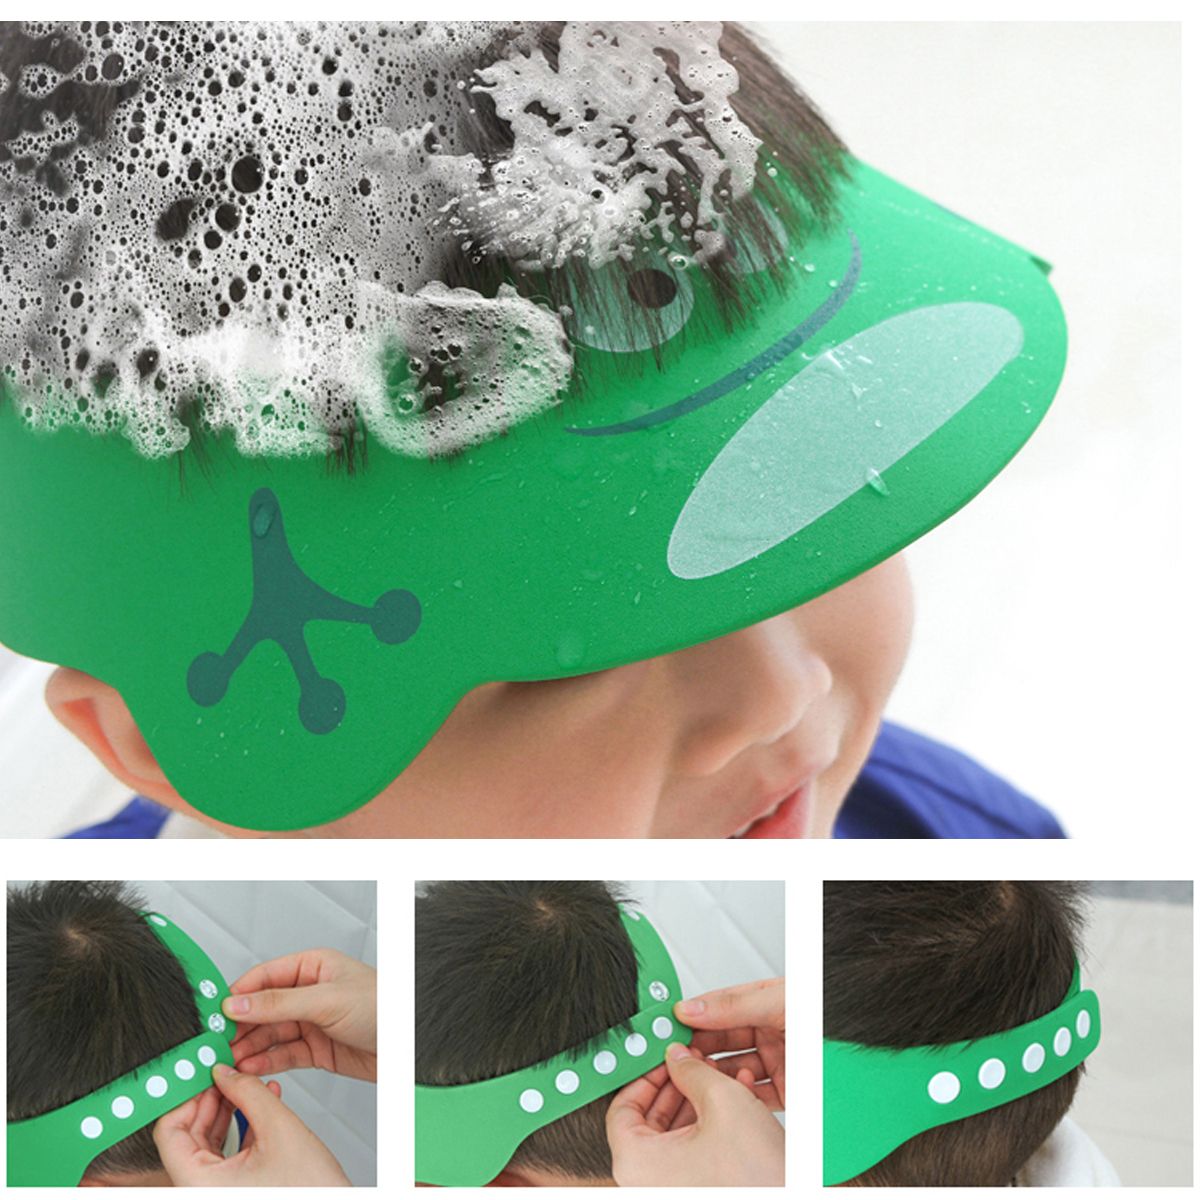 Adjustable-Bathing-Shower-Shampoo-Cap-Hair-Washing-Shield-Hat-Protect-Ears-Eyes-For-Kids-Baby-1399203